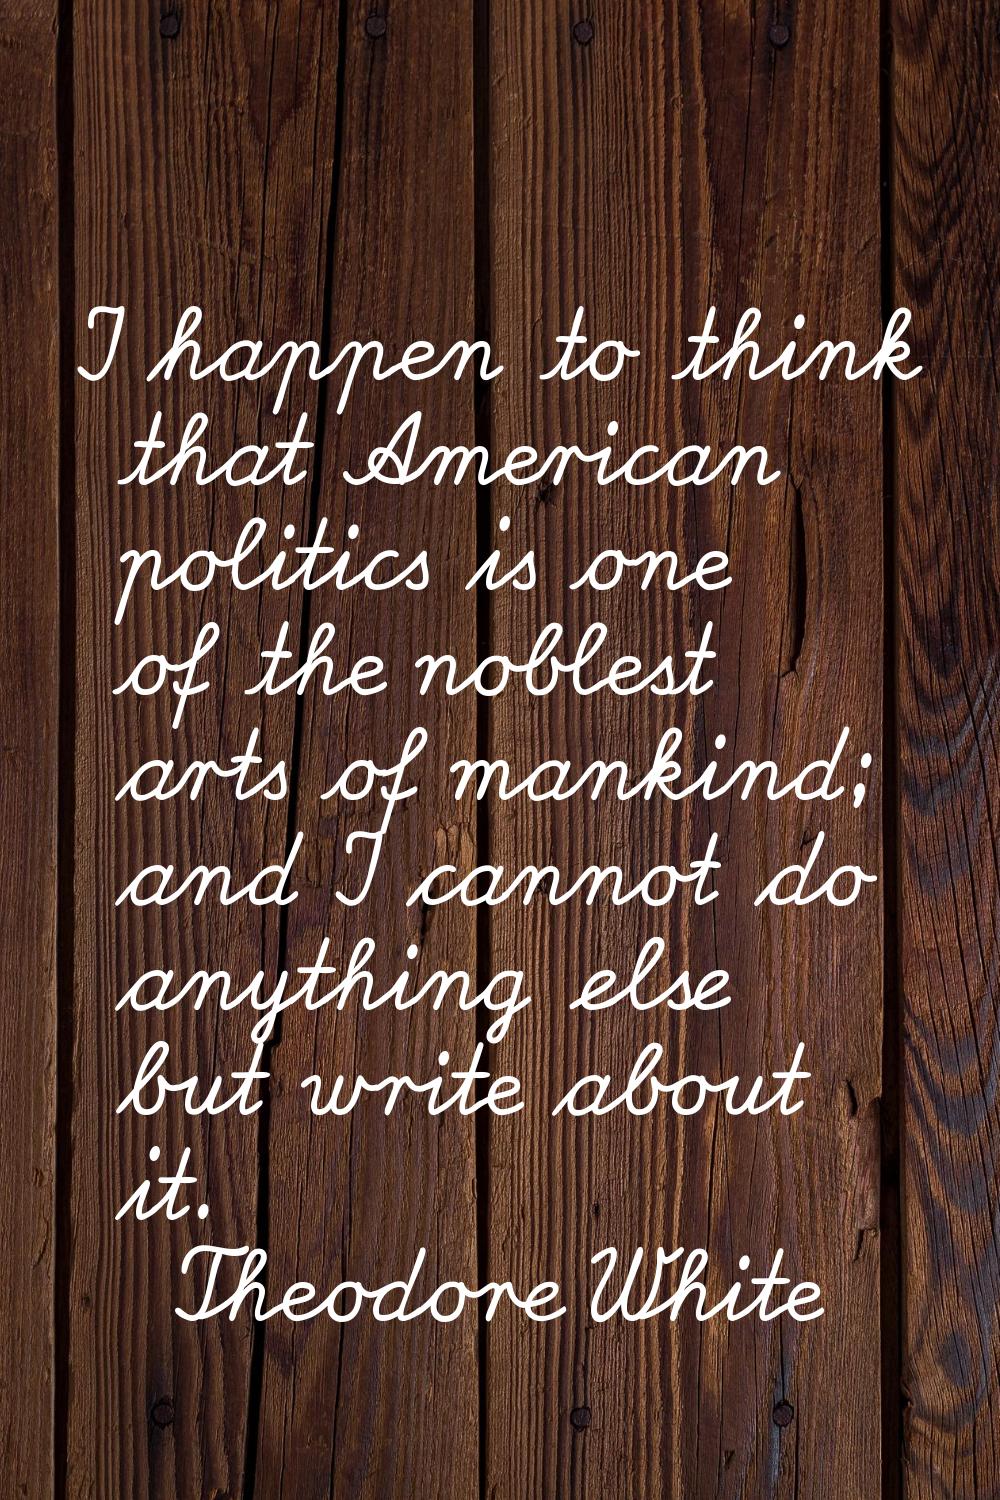 I happen to think that American politics is one of the noblest arts of mankind; and I cannot do any